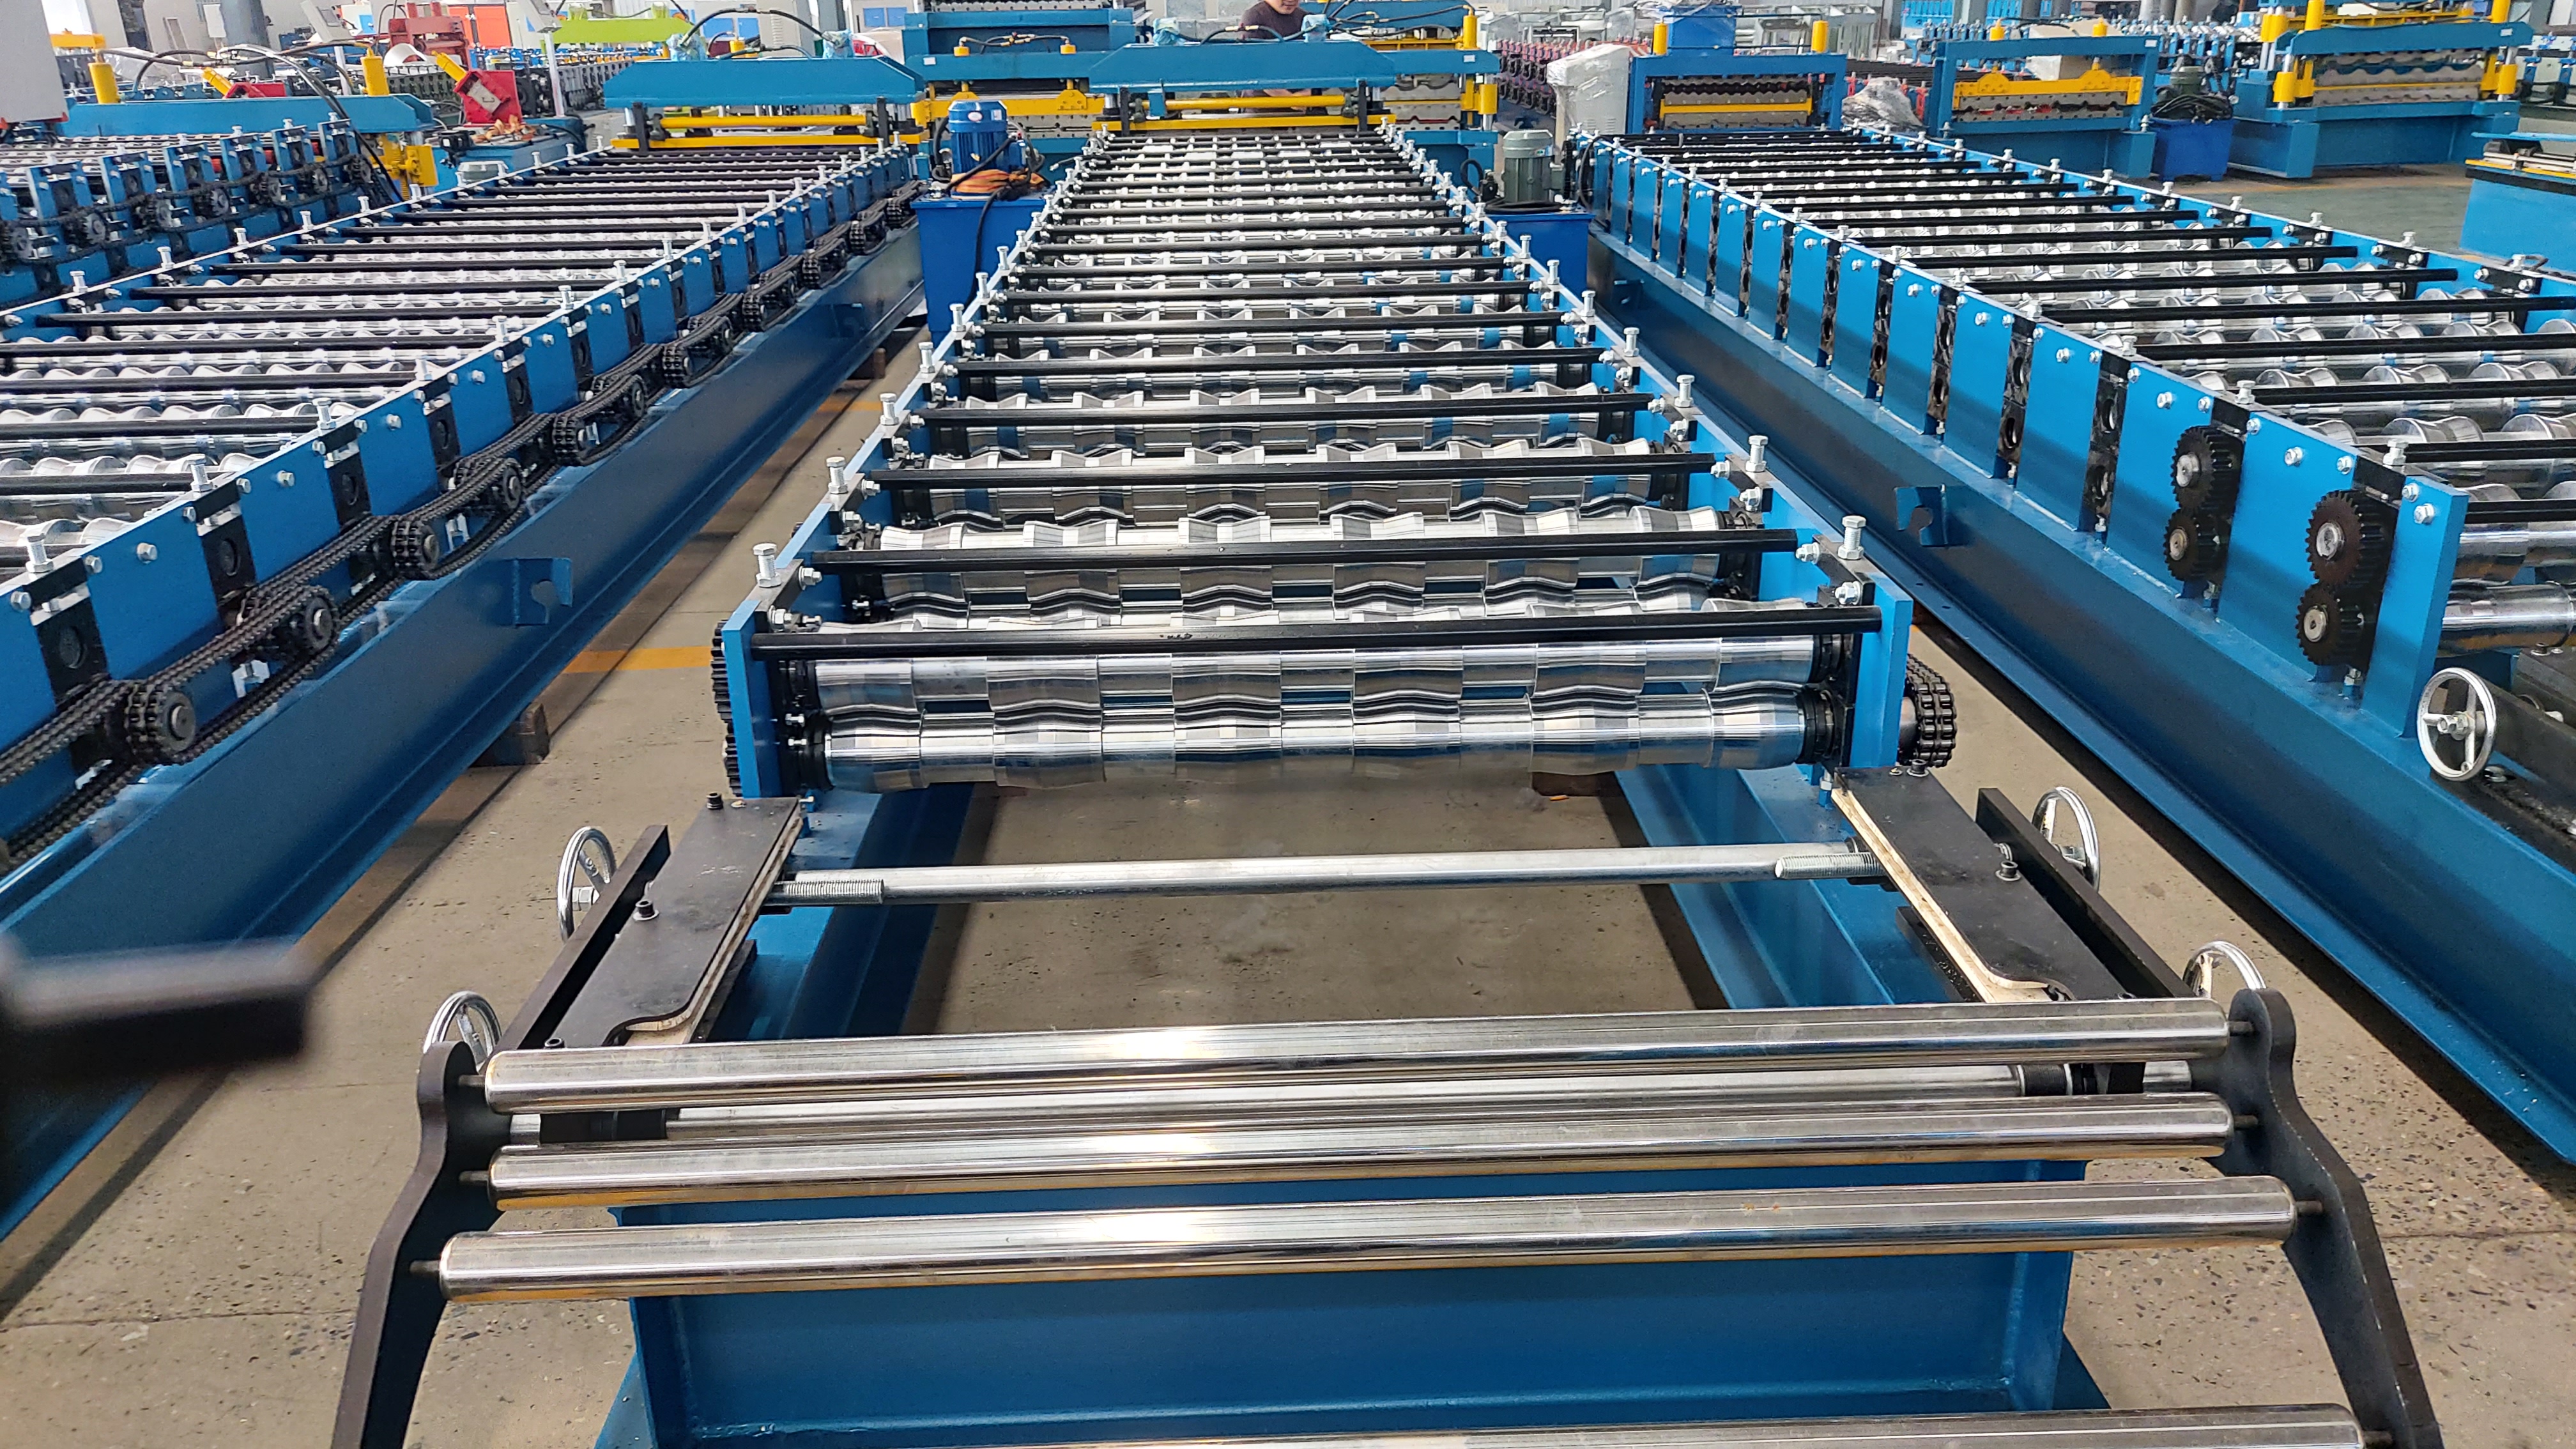 Kenya roof sheet roll forming machine has completed